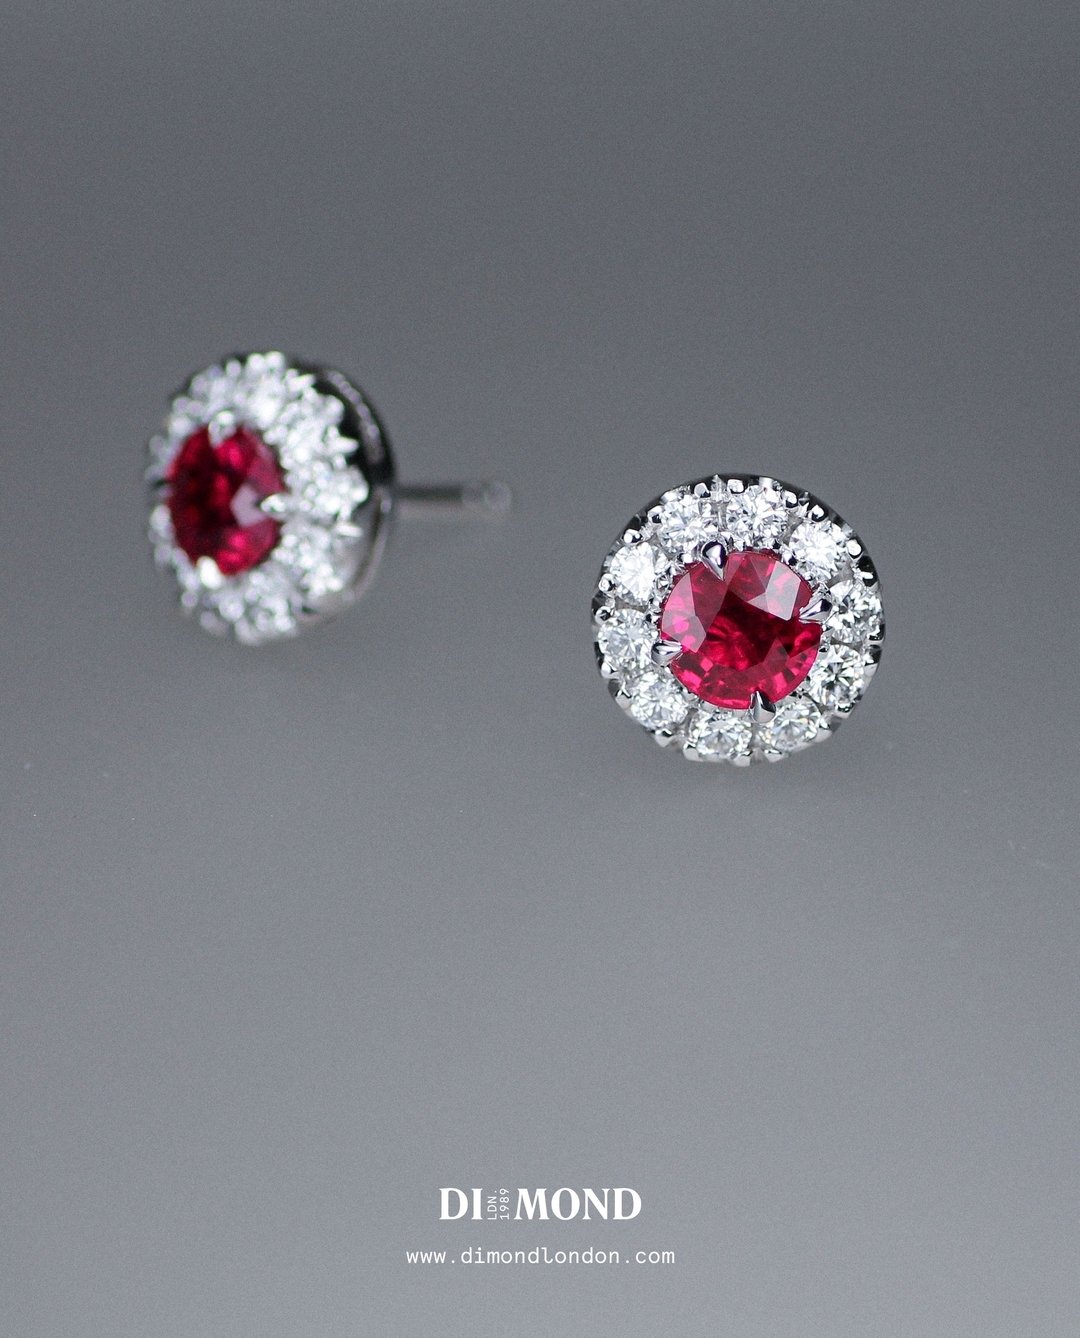 Beyond crafting beautiful engagement rings and wedding bands, we specialise in handcrafting a wide array of fine jewellery, backed by over 60 years of expertise in the field.

These round cut pigeon blood ruby earrings, set in a contrasting white dia